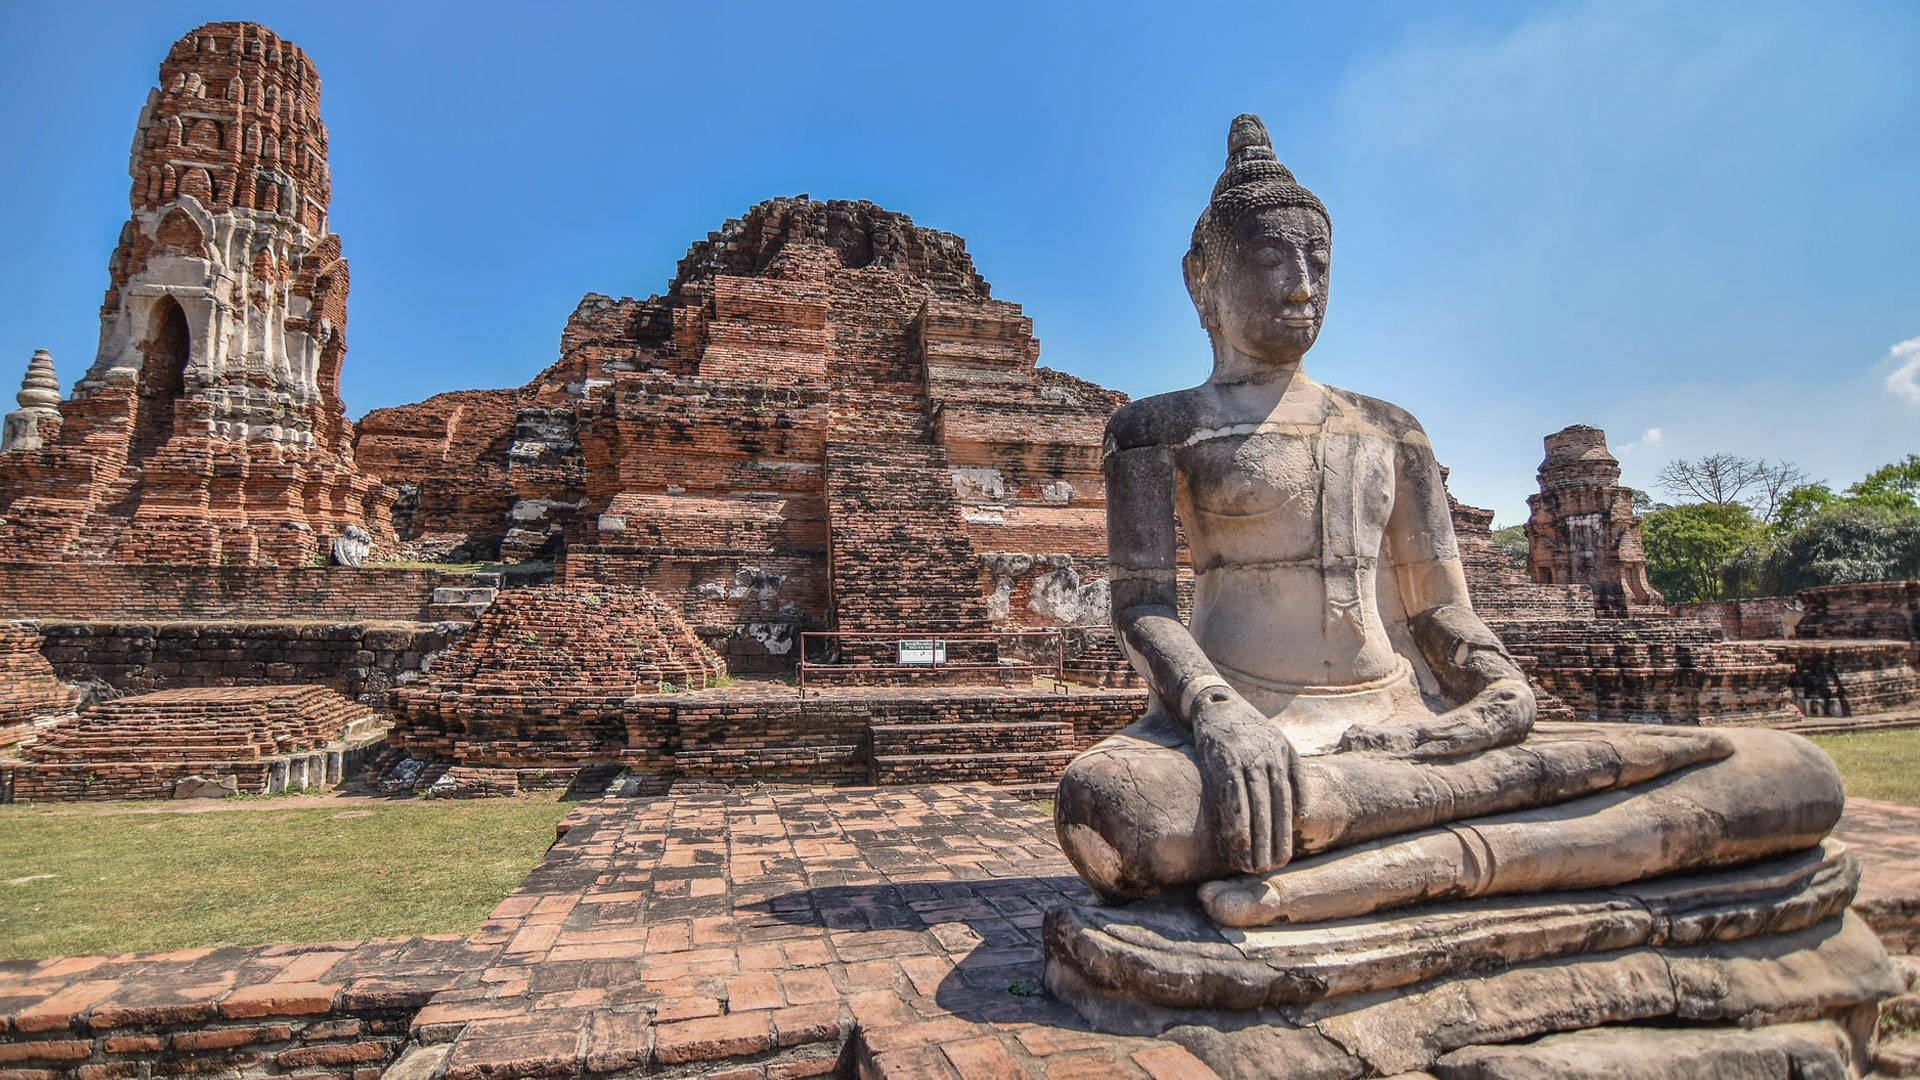 A photo of the ruins of the ancient capital of Ayutthaya